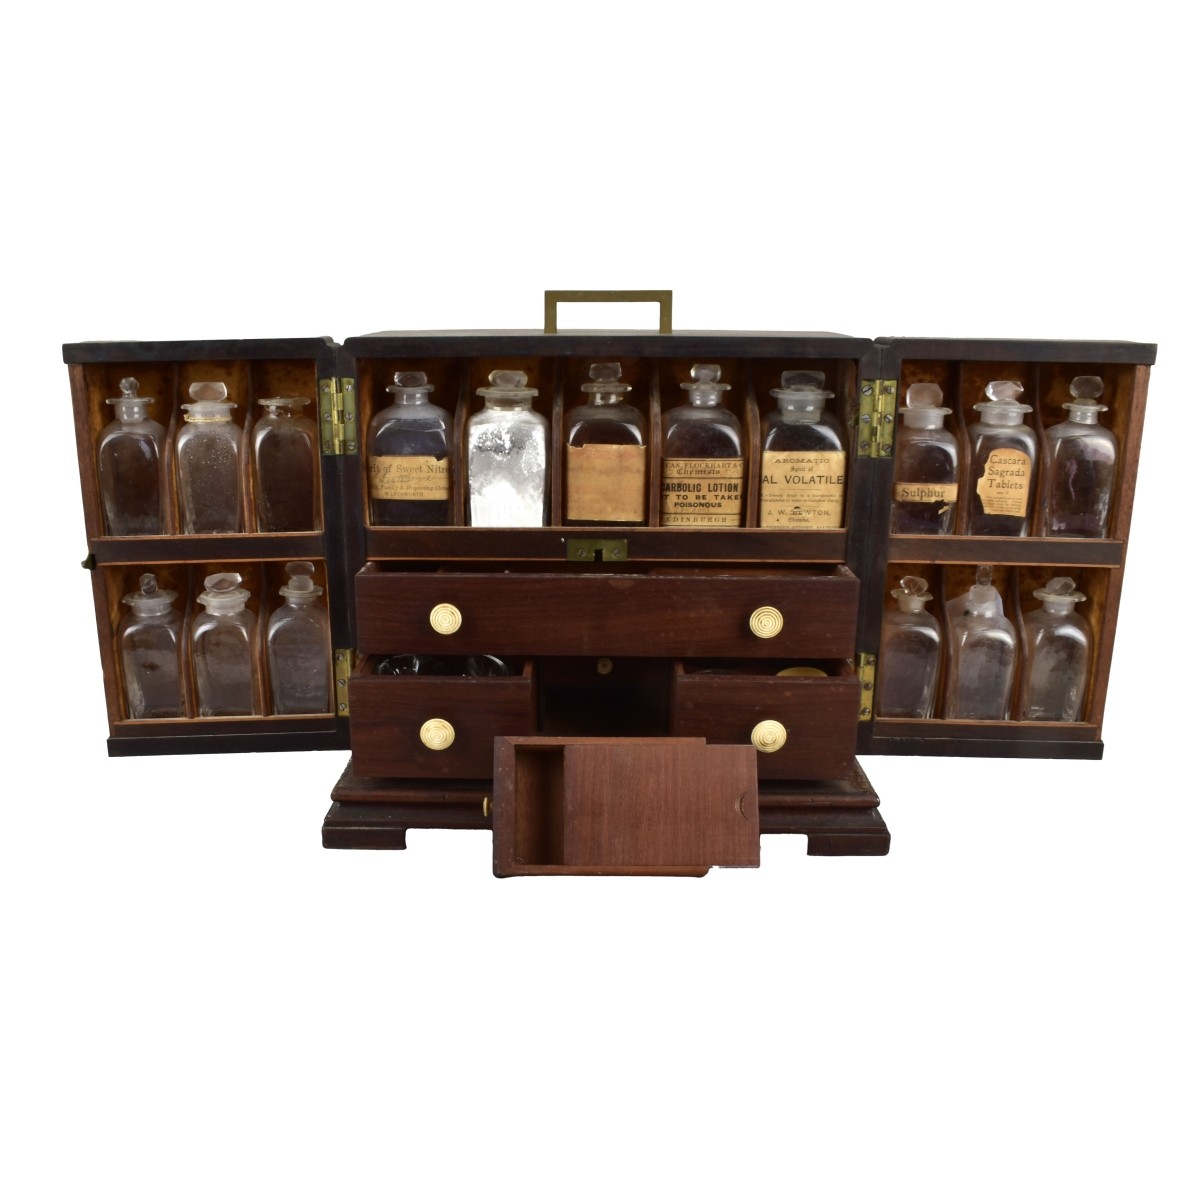 19C Apothecary Cabinet